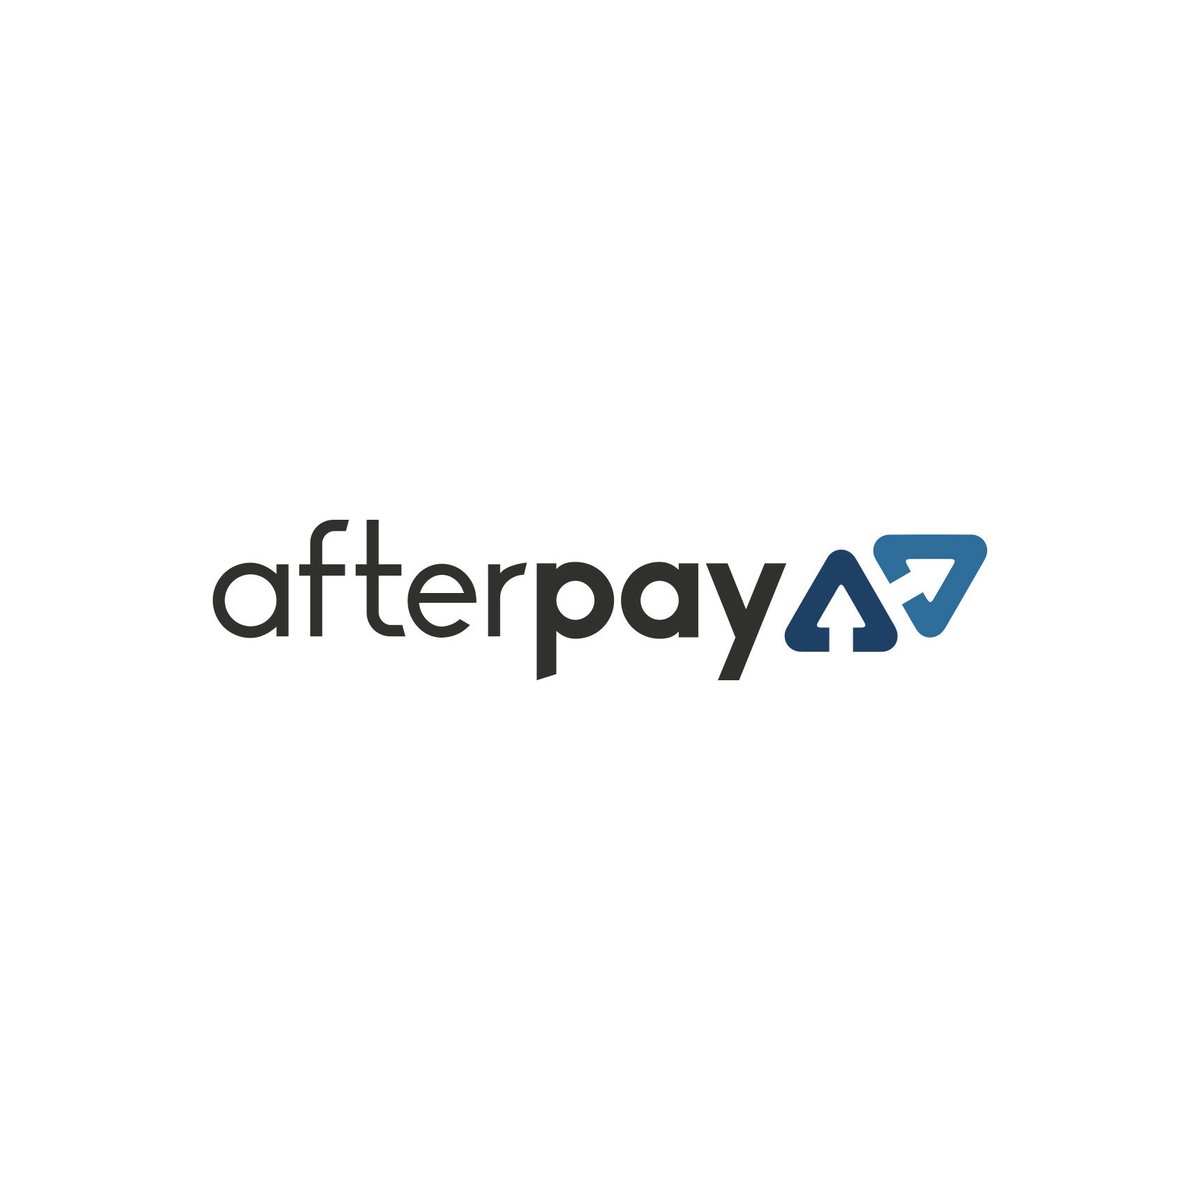 Shop now and pay later! 

#afterpay #afterpayaccepted #shopnowpaylater #blackfriday #blackfridaysale #blackfriday2020 #smallbusinesssaturday #cybermonday2020 #thanksgiving2020